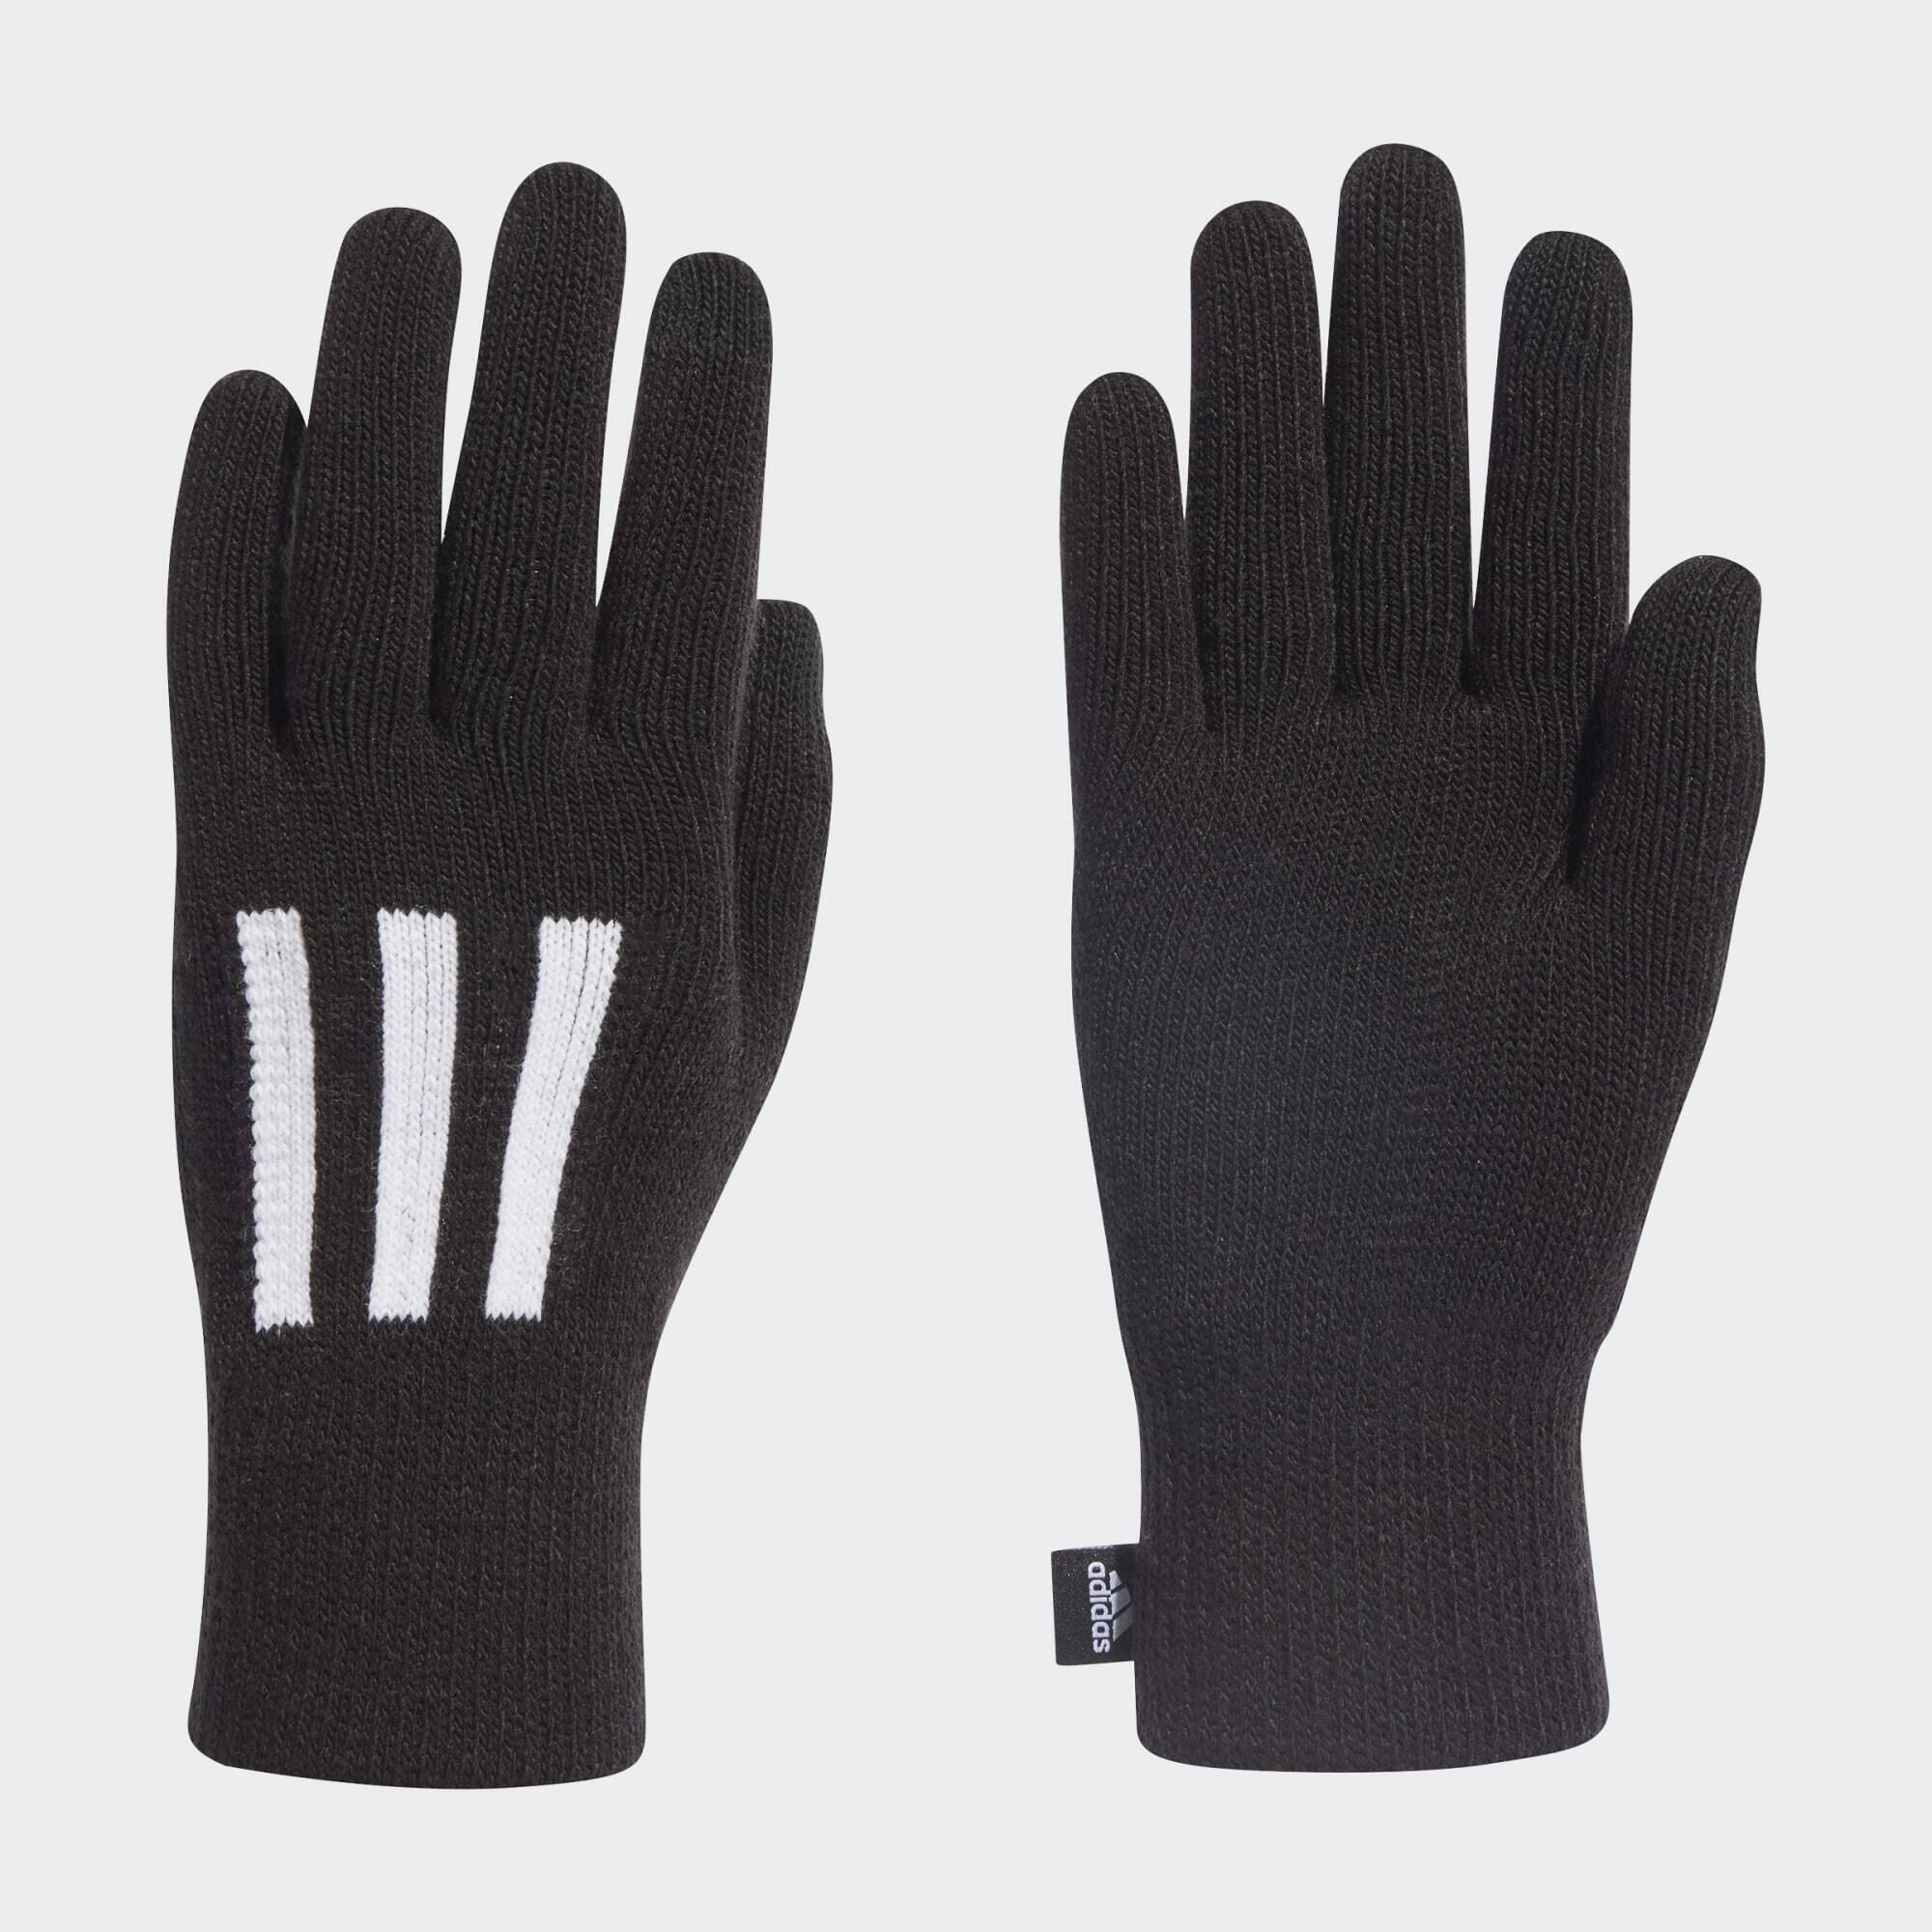 3-Stripes Conductive Gloves 2/5